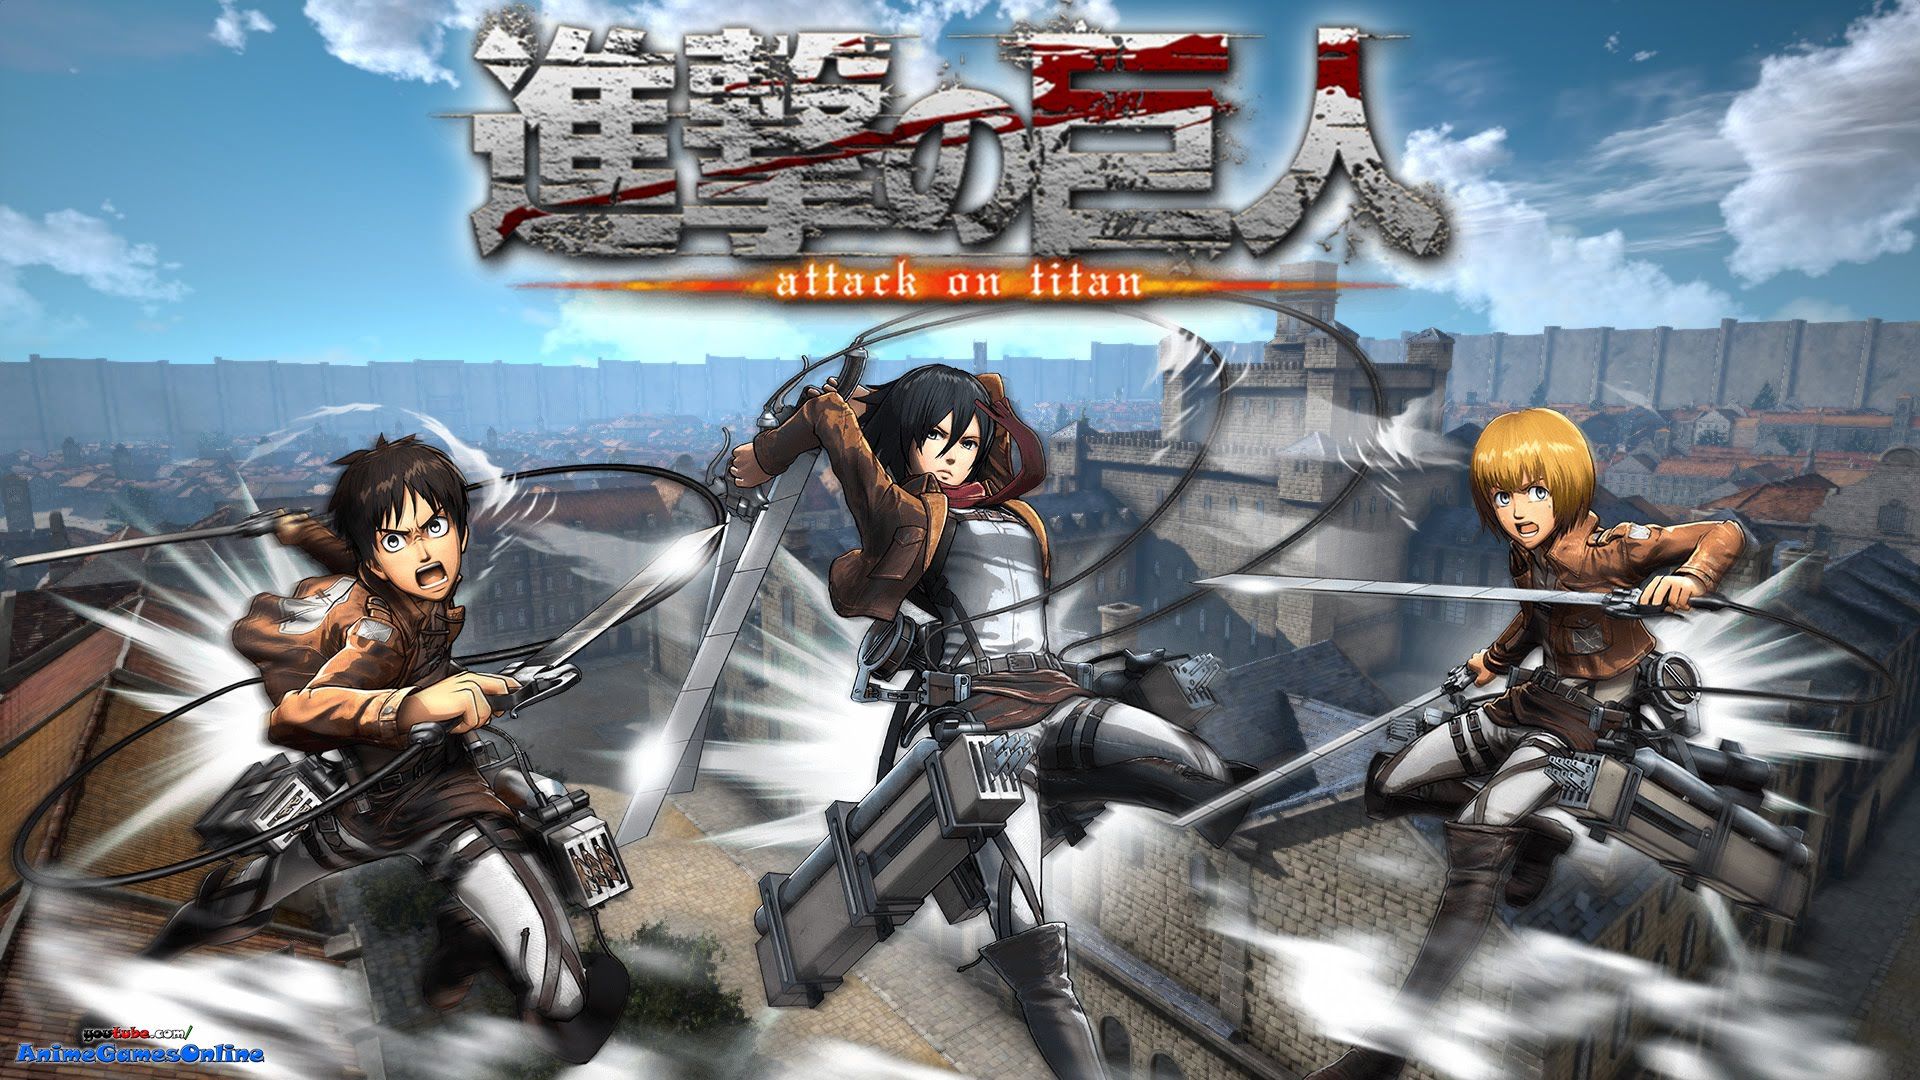 ATTACK ON TITAN 進撃の巨人 Will Be Digital Only on PS3.O.T